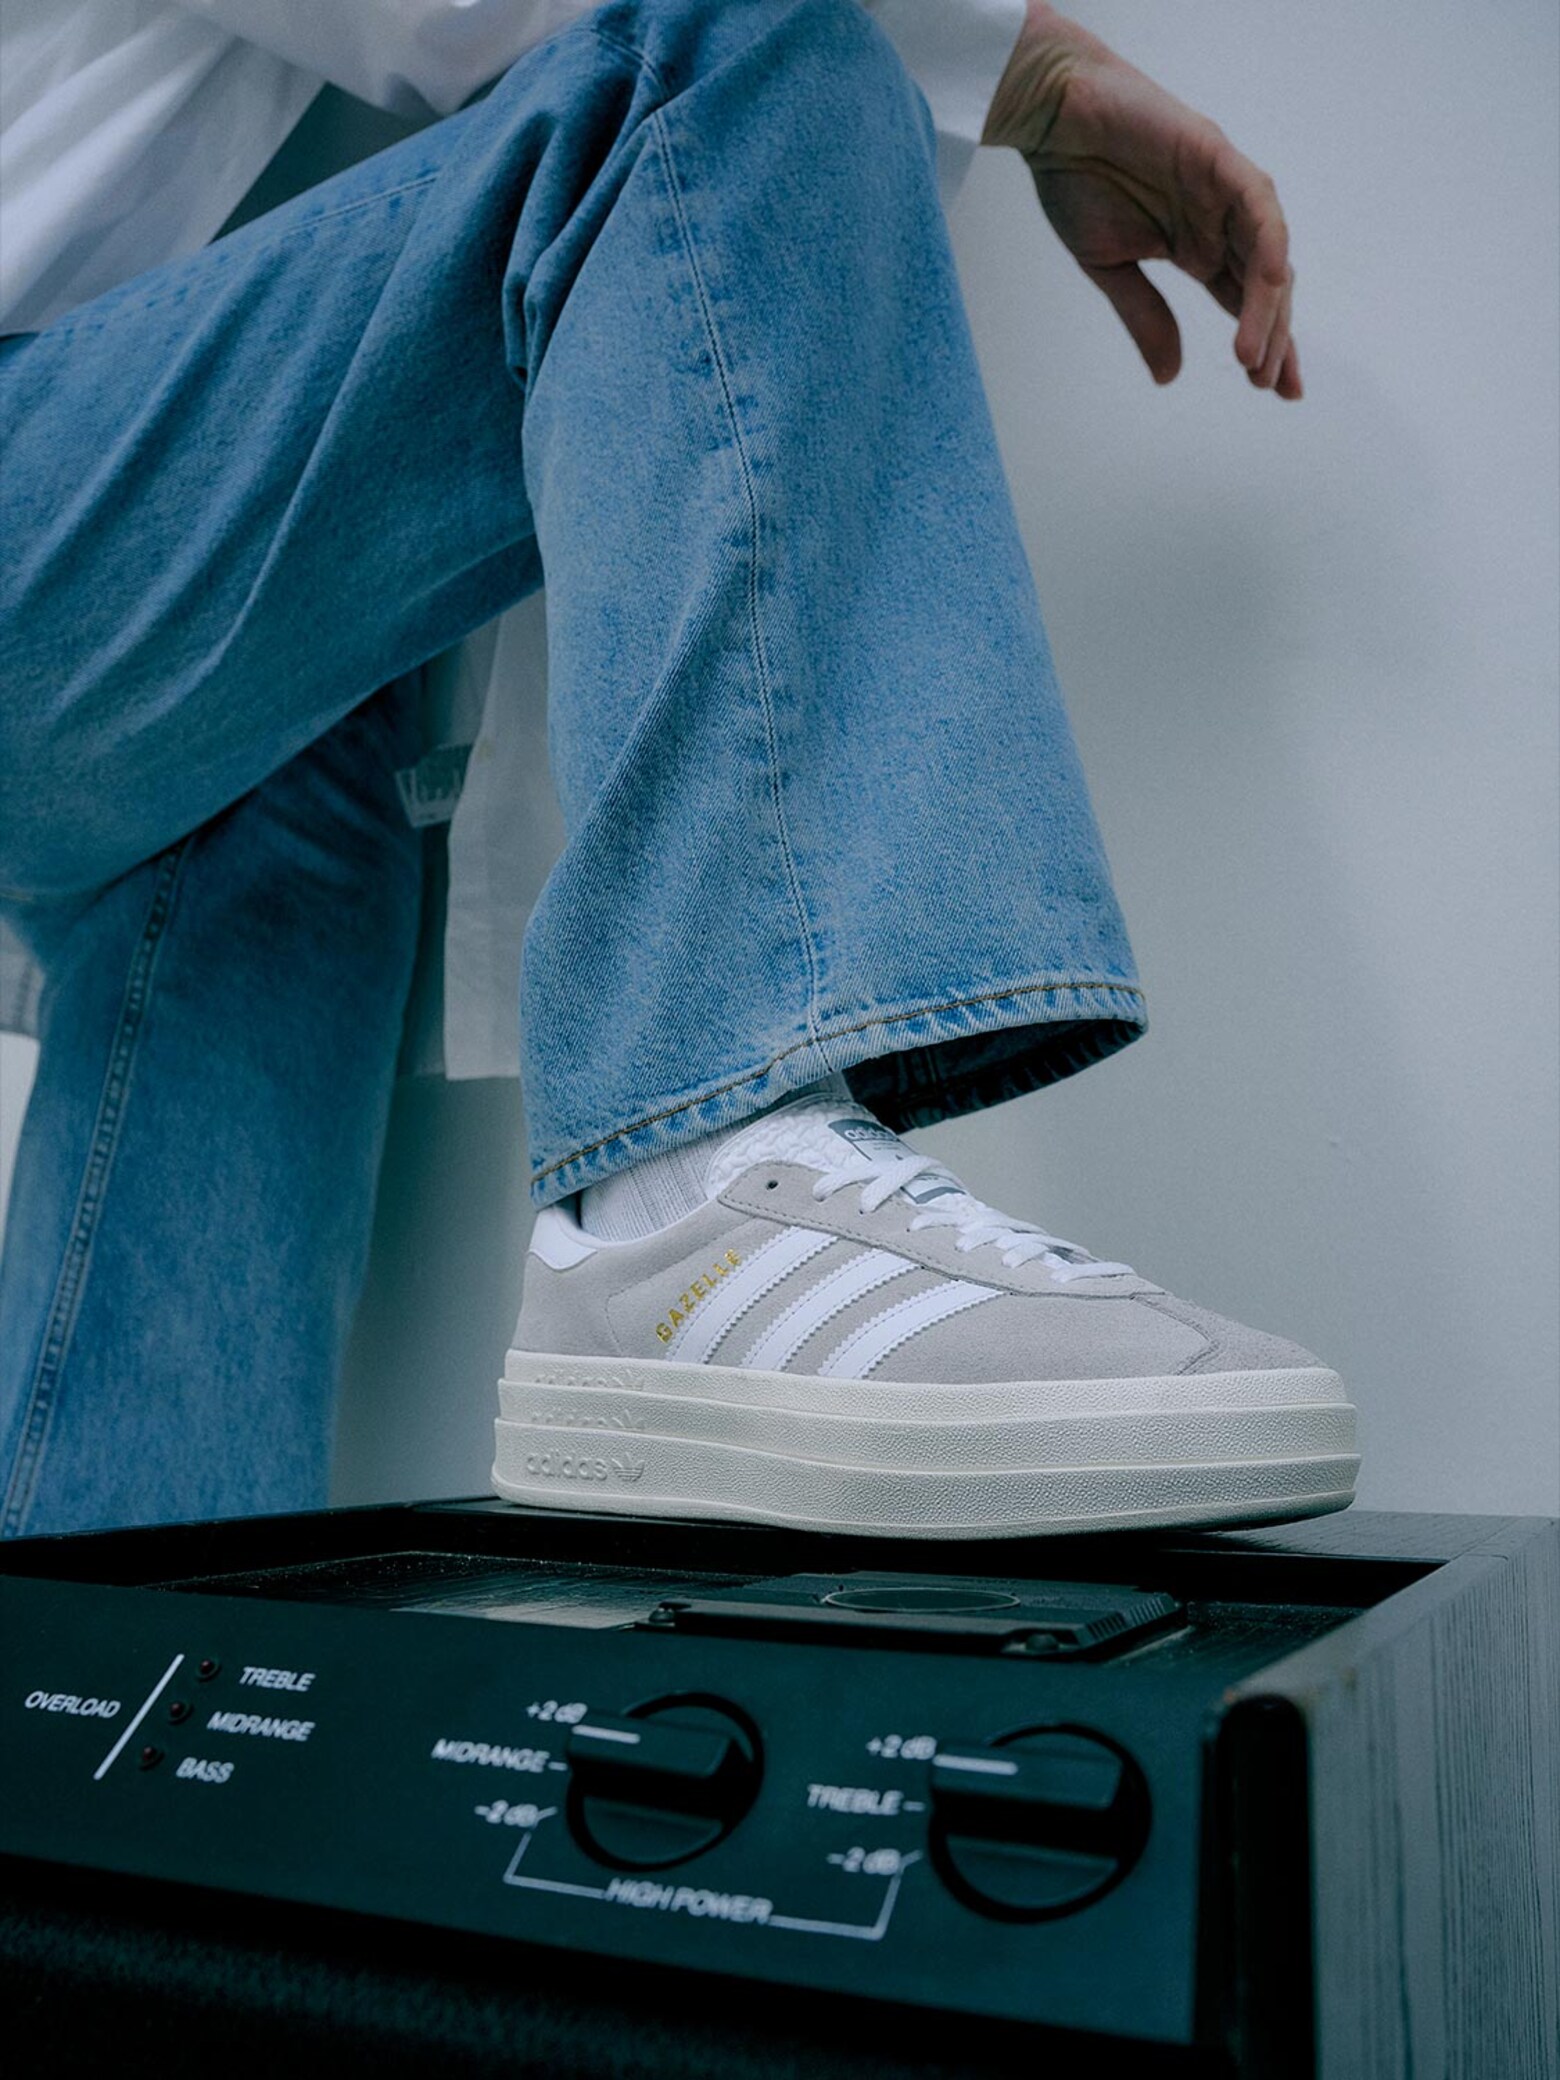 Our wardrobe icons Sneakers on stride